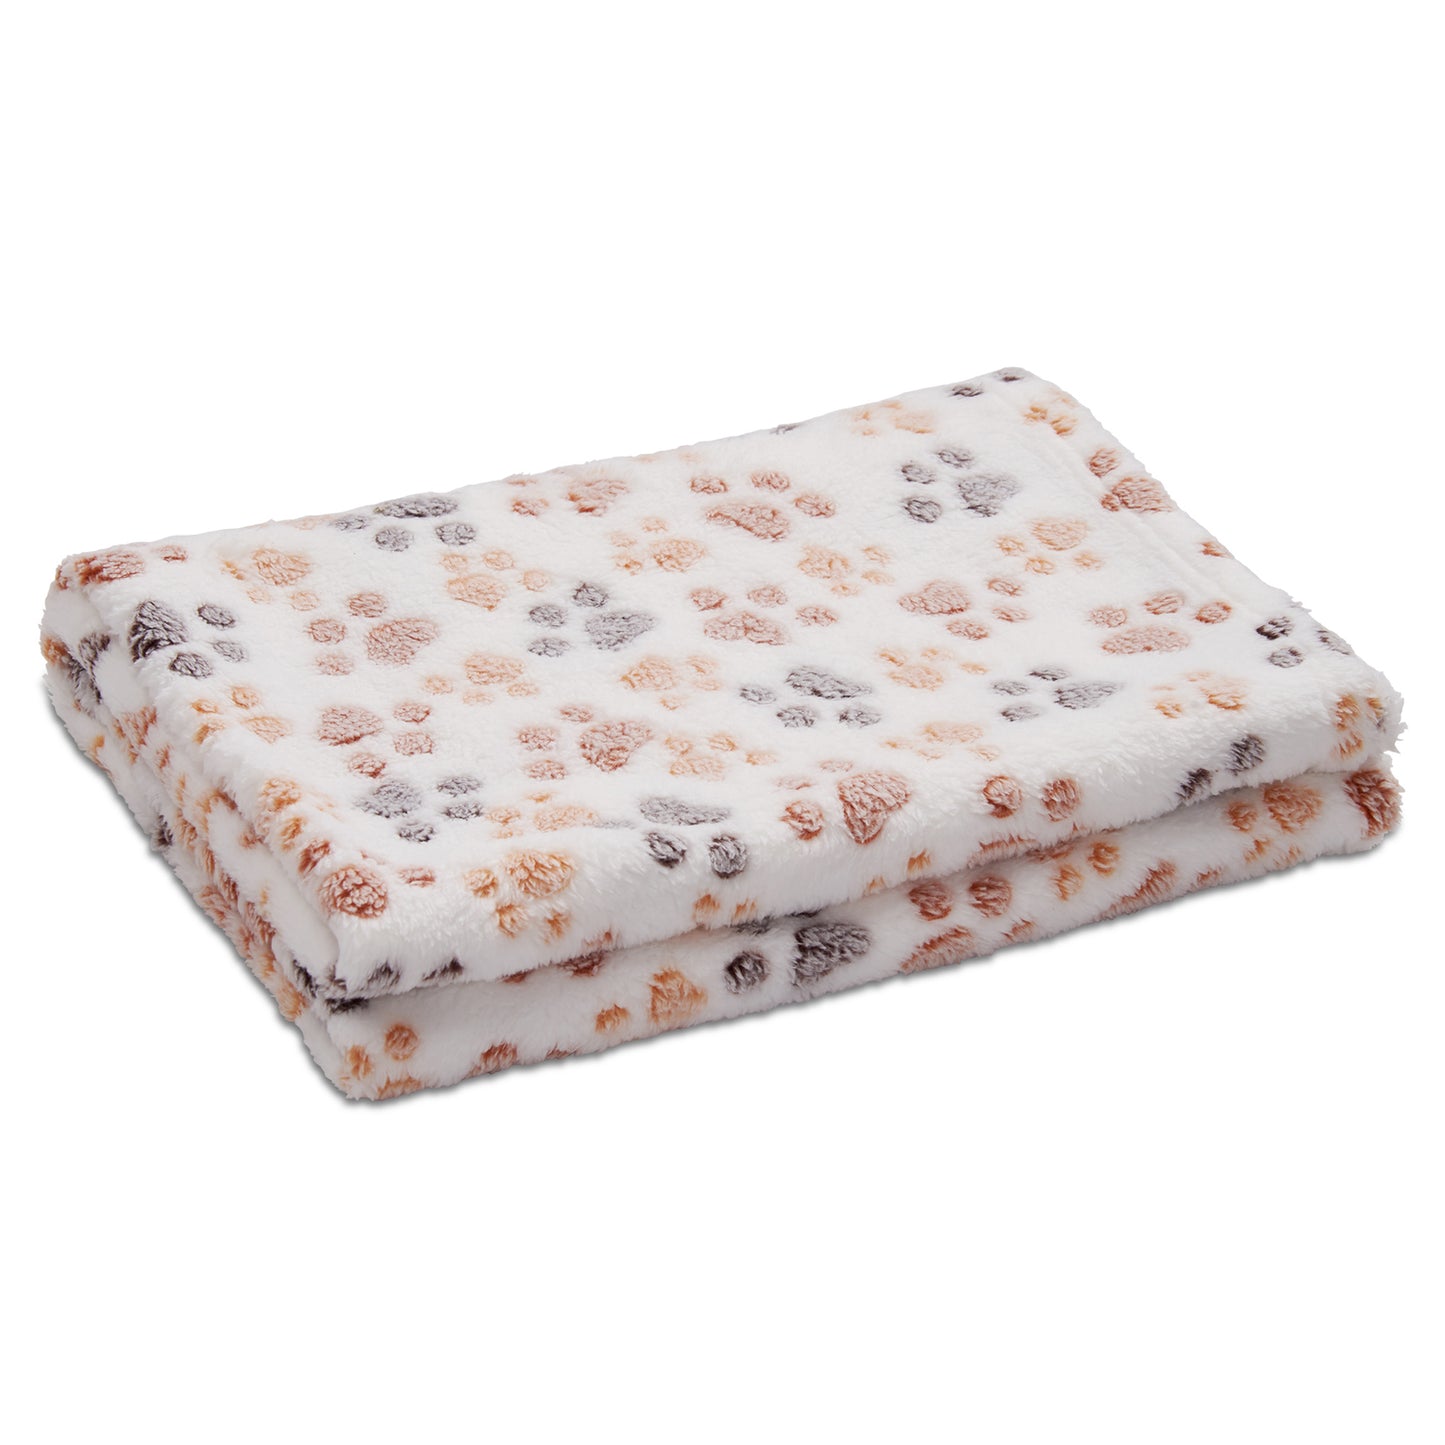 Puppy Sleeping Small Cats Bed Doggy Soft Warming Fleece Pet Dogs Blanket 104*76Cm White #2 Animals & Pet Supplies > Pet Supplies > Cat Supplies > Cat Beds Luxmo   